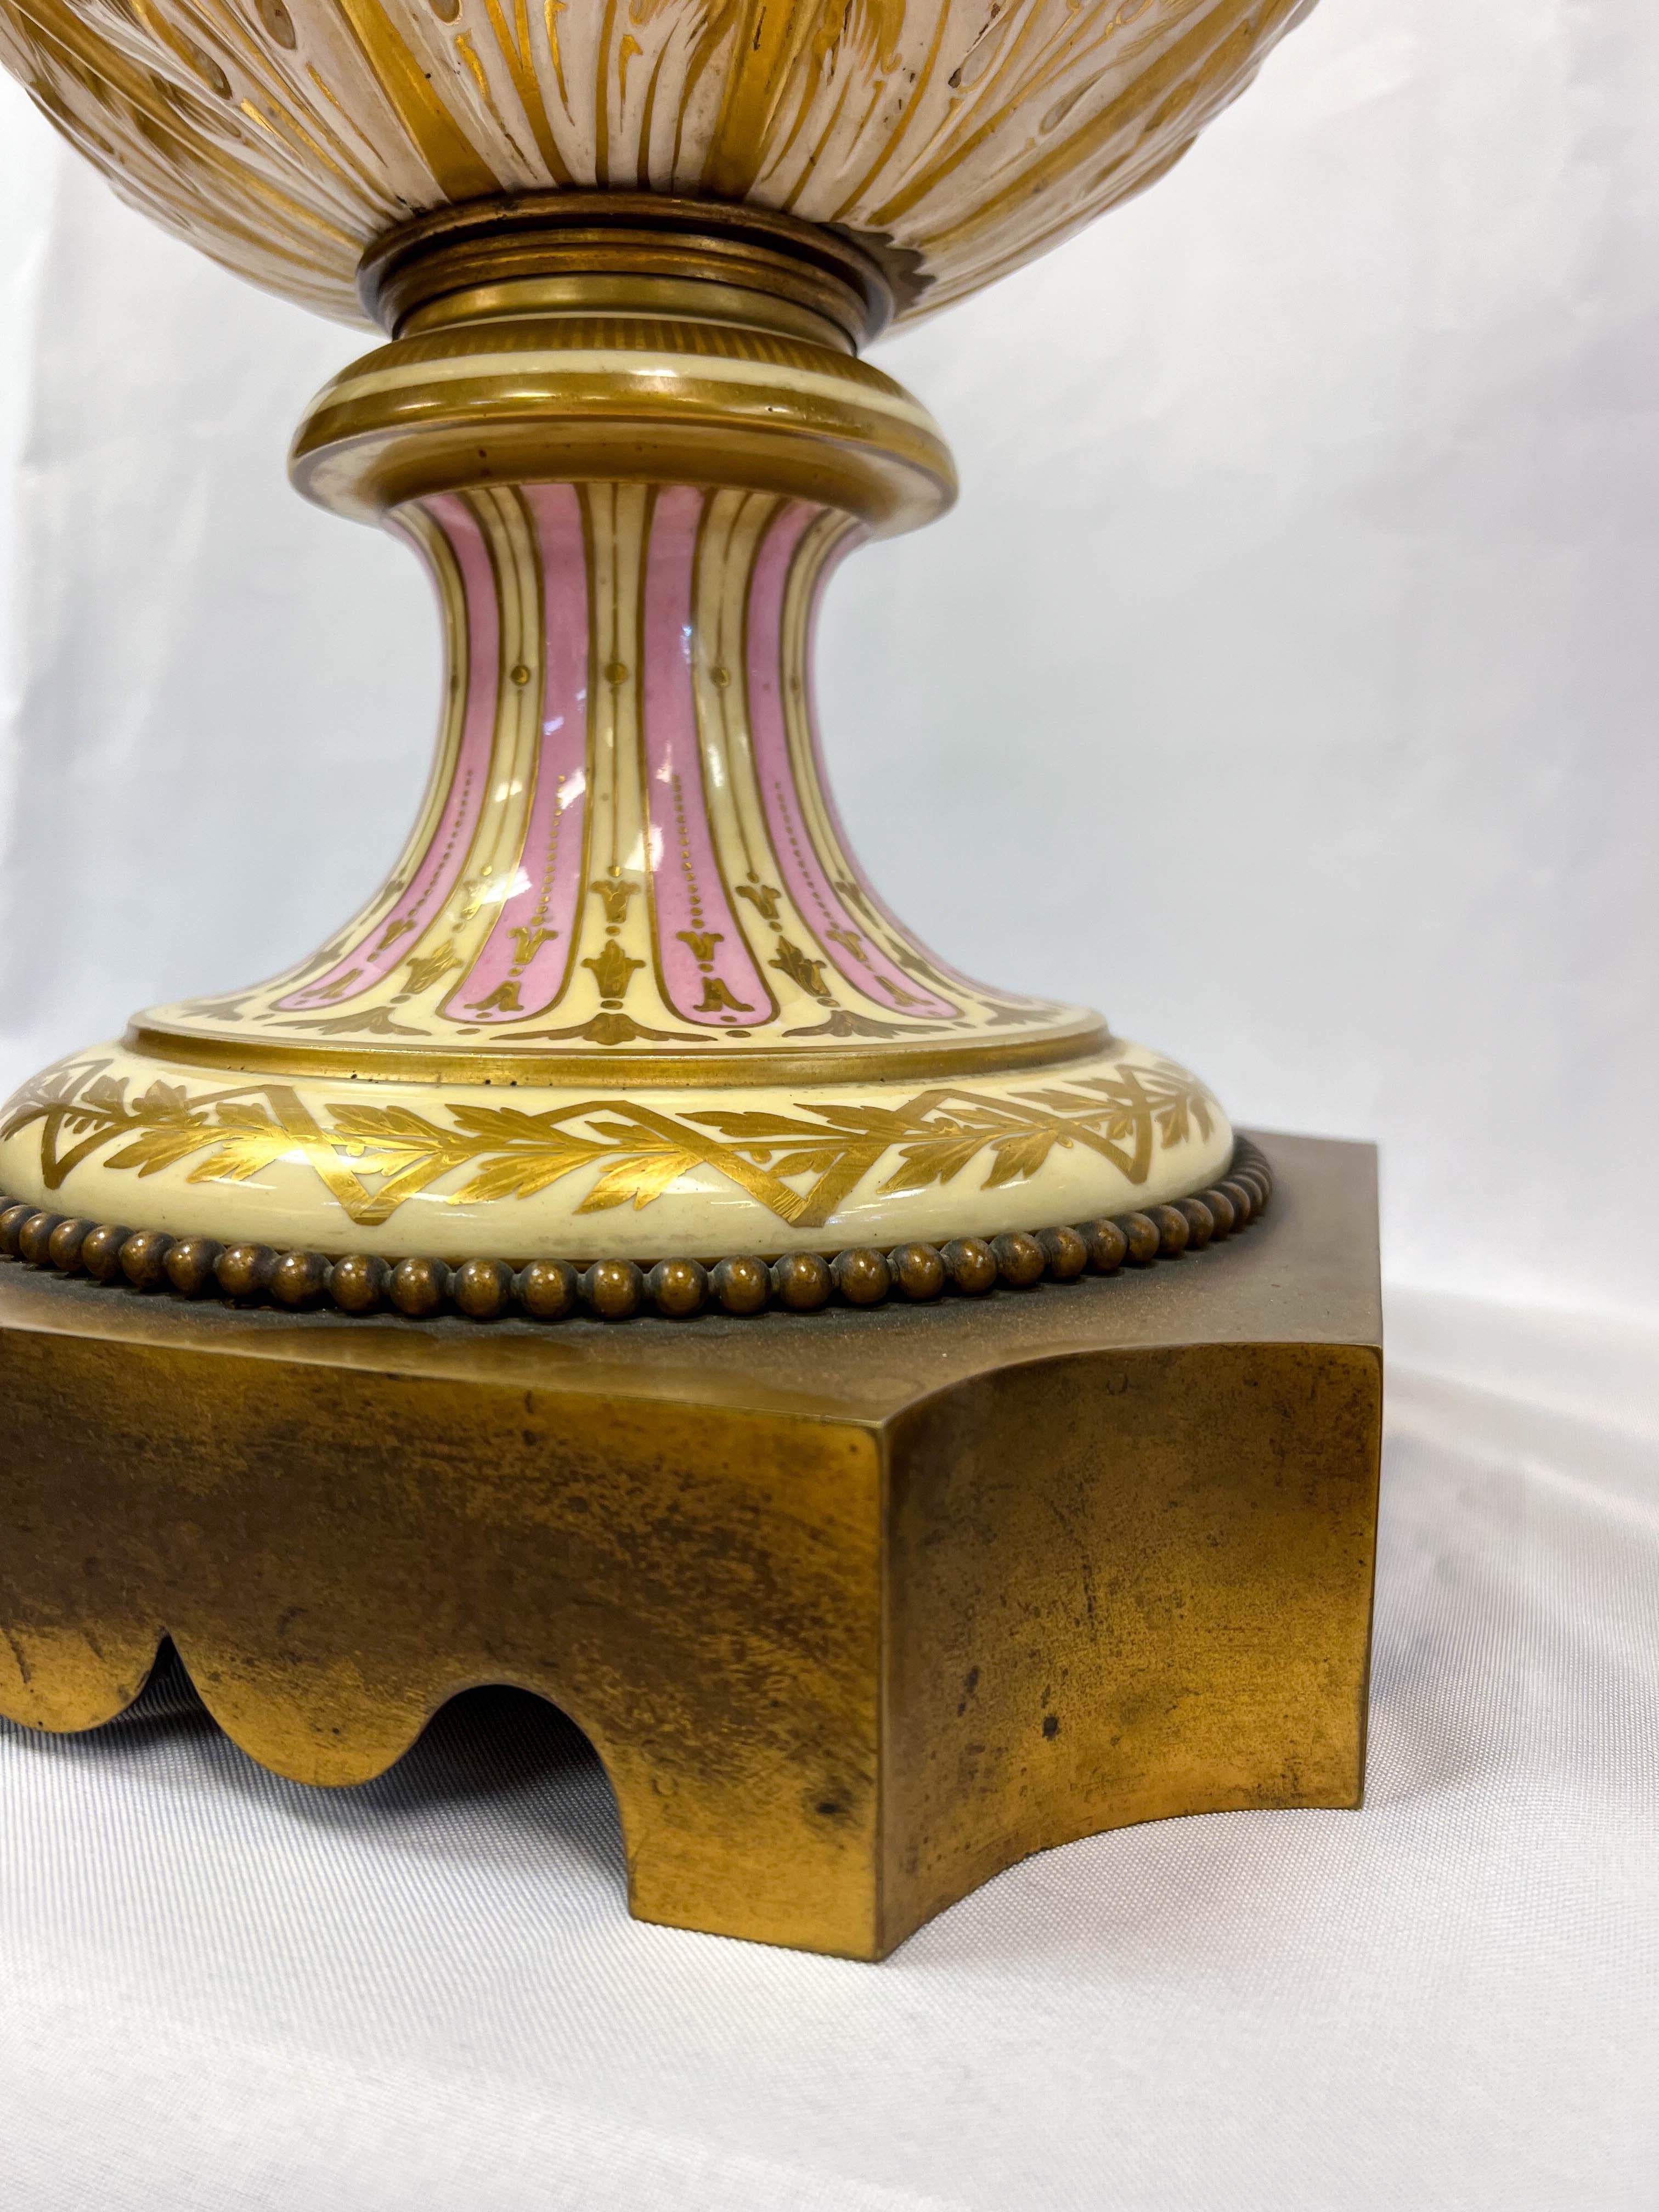 19th Century Large Scale Neoclassical Ormolu Sèvres Urn For Sale 10